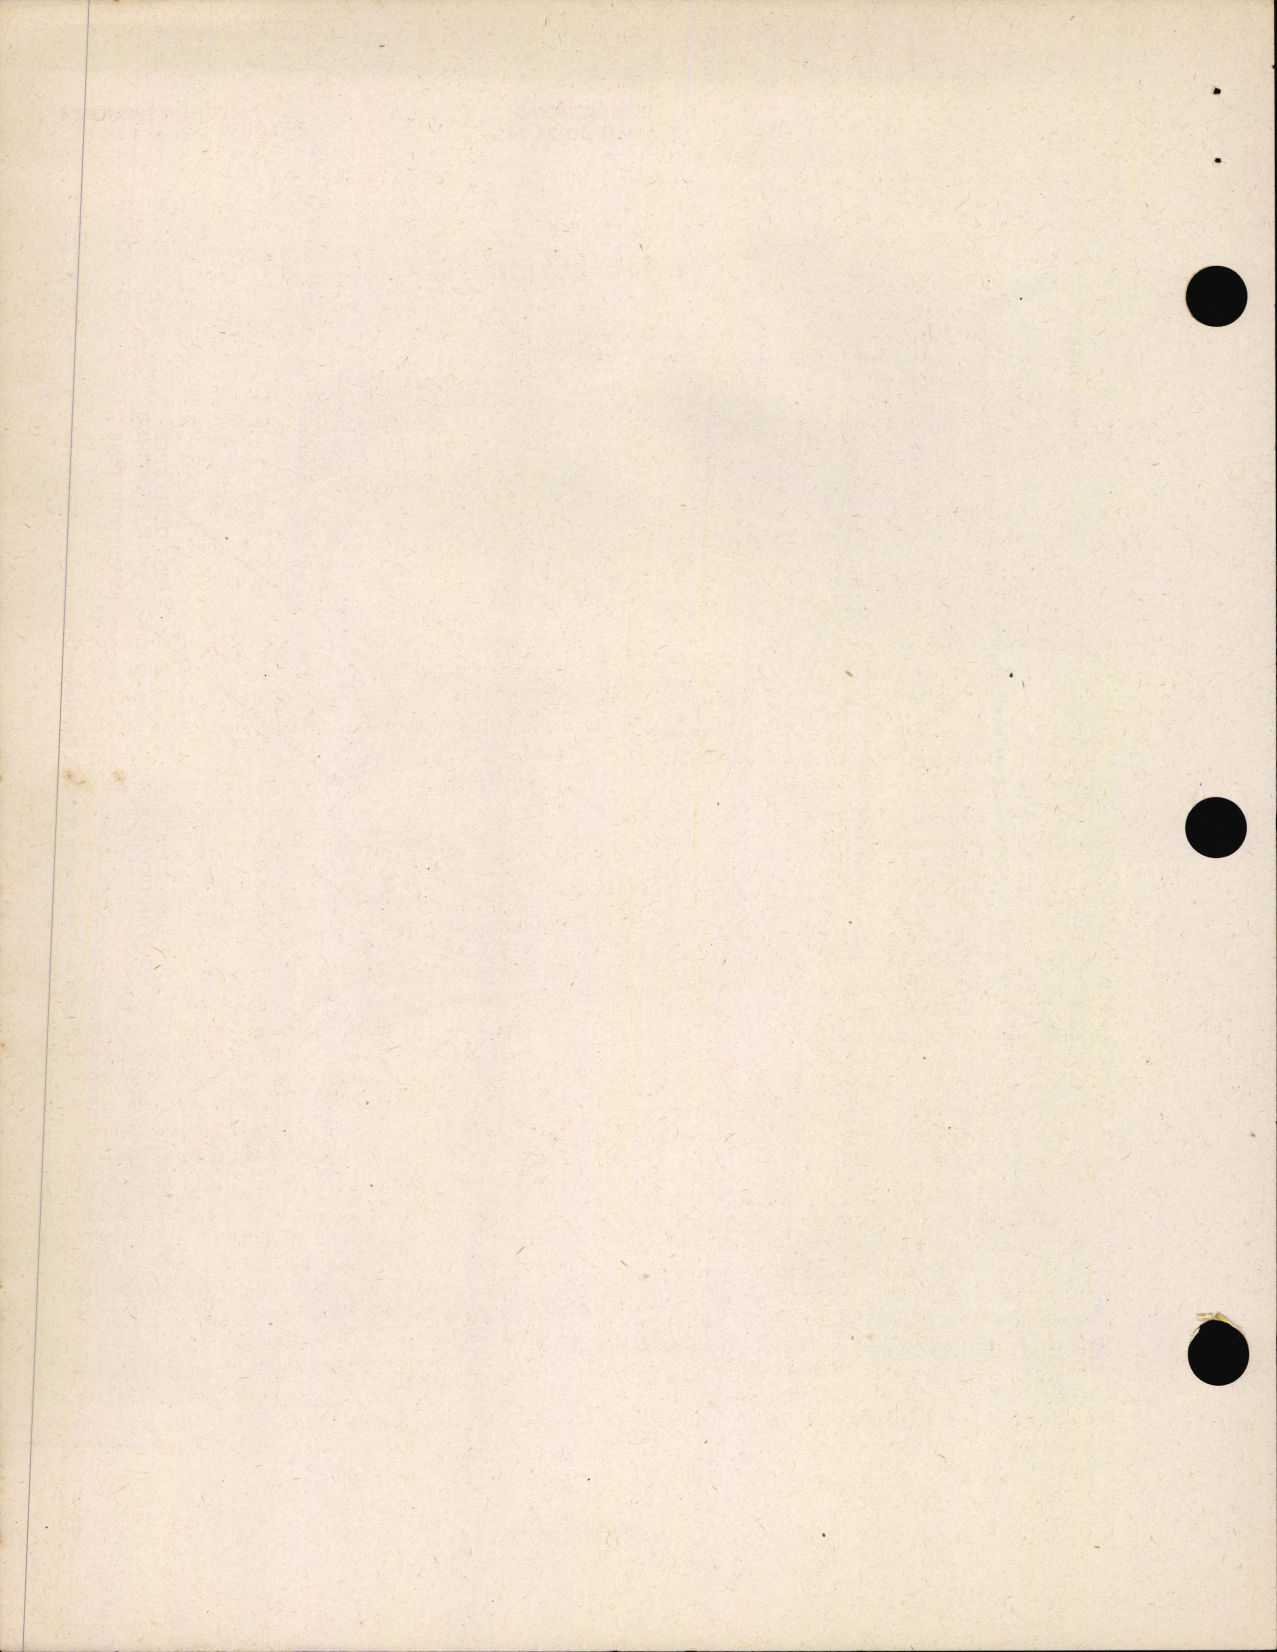 Sample page 6 from AirCorps Library document: Handbook of Instructions with Parts Catalog for Photographic Film-Processing Refrigerator